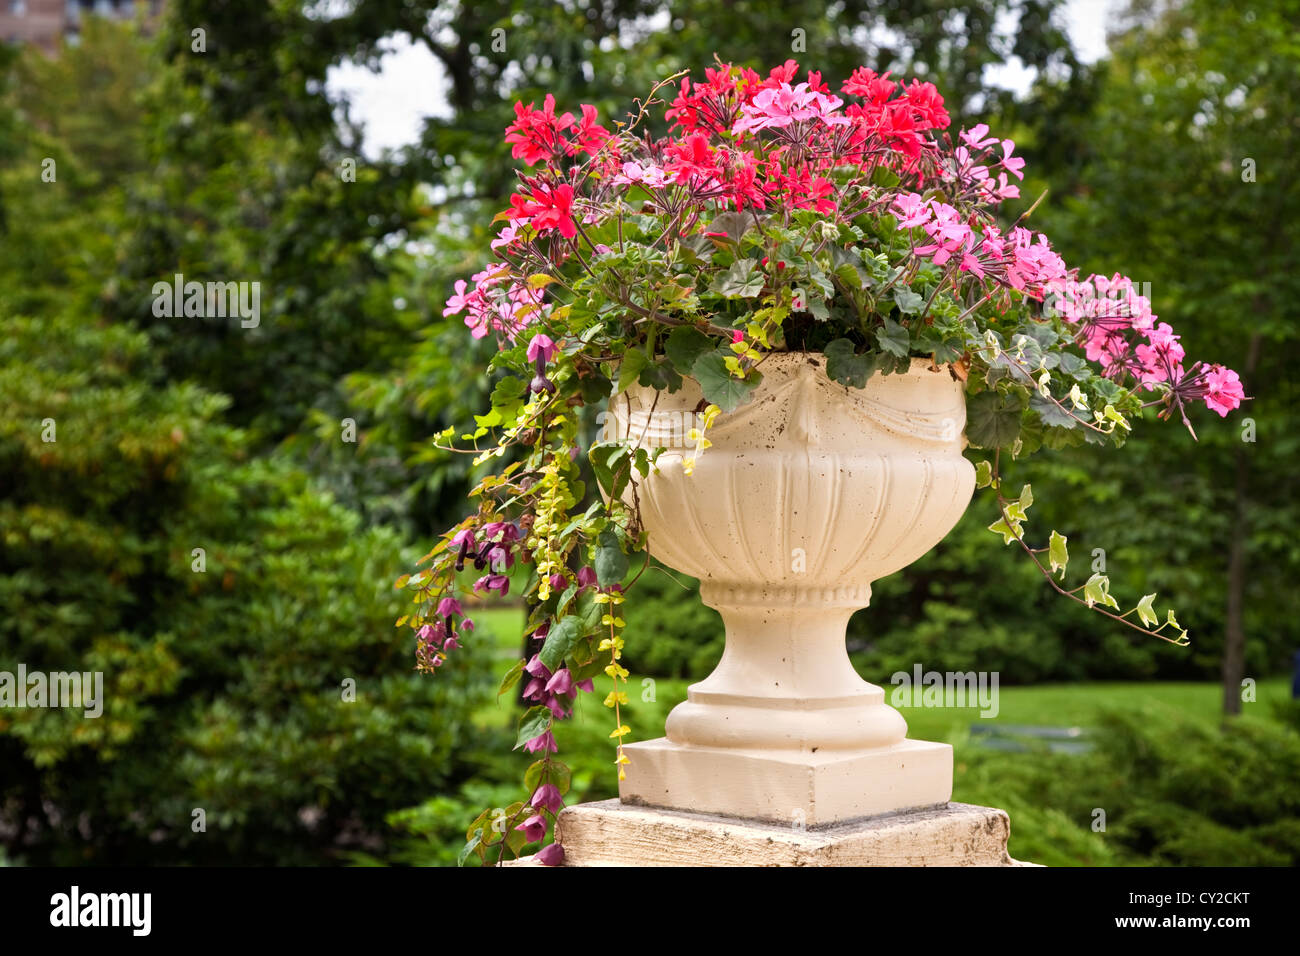 Annual flowers grown in an ornate pedestal planter. Stock Photo